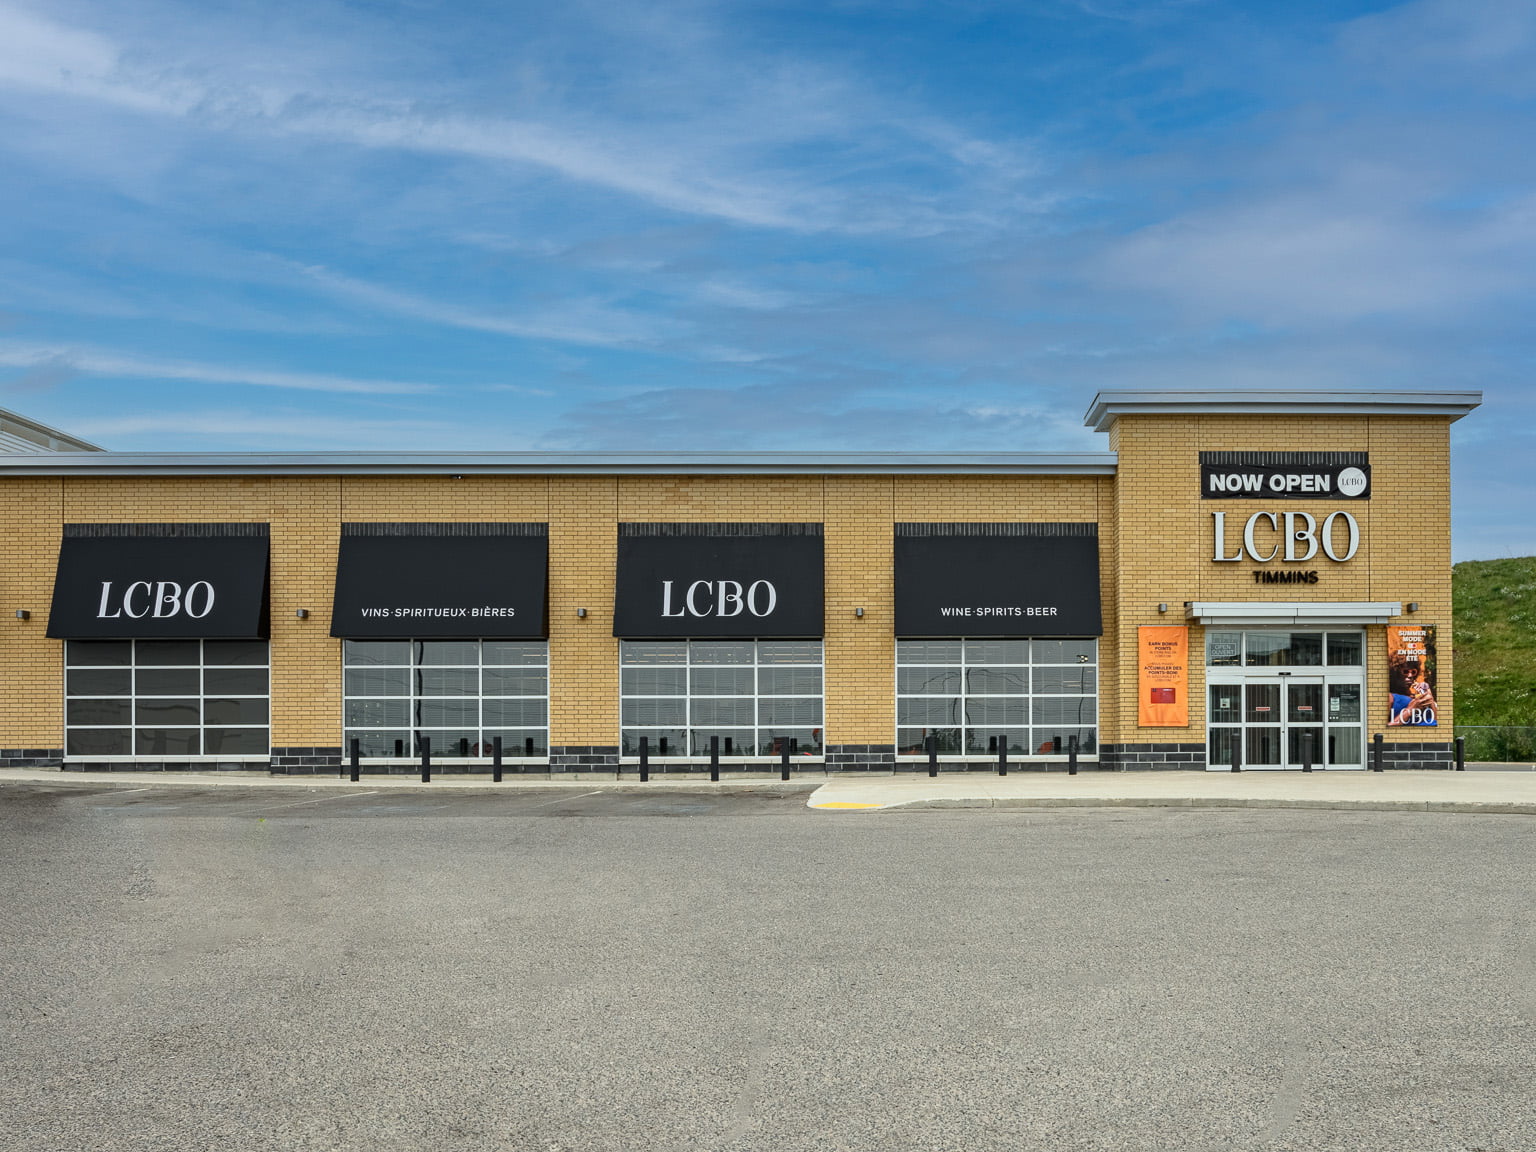 LCBO - Timmins - combination of spandrel glass and brick finish